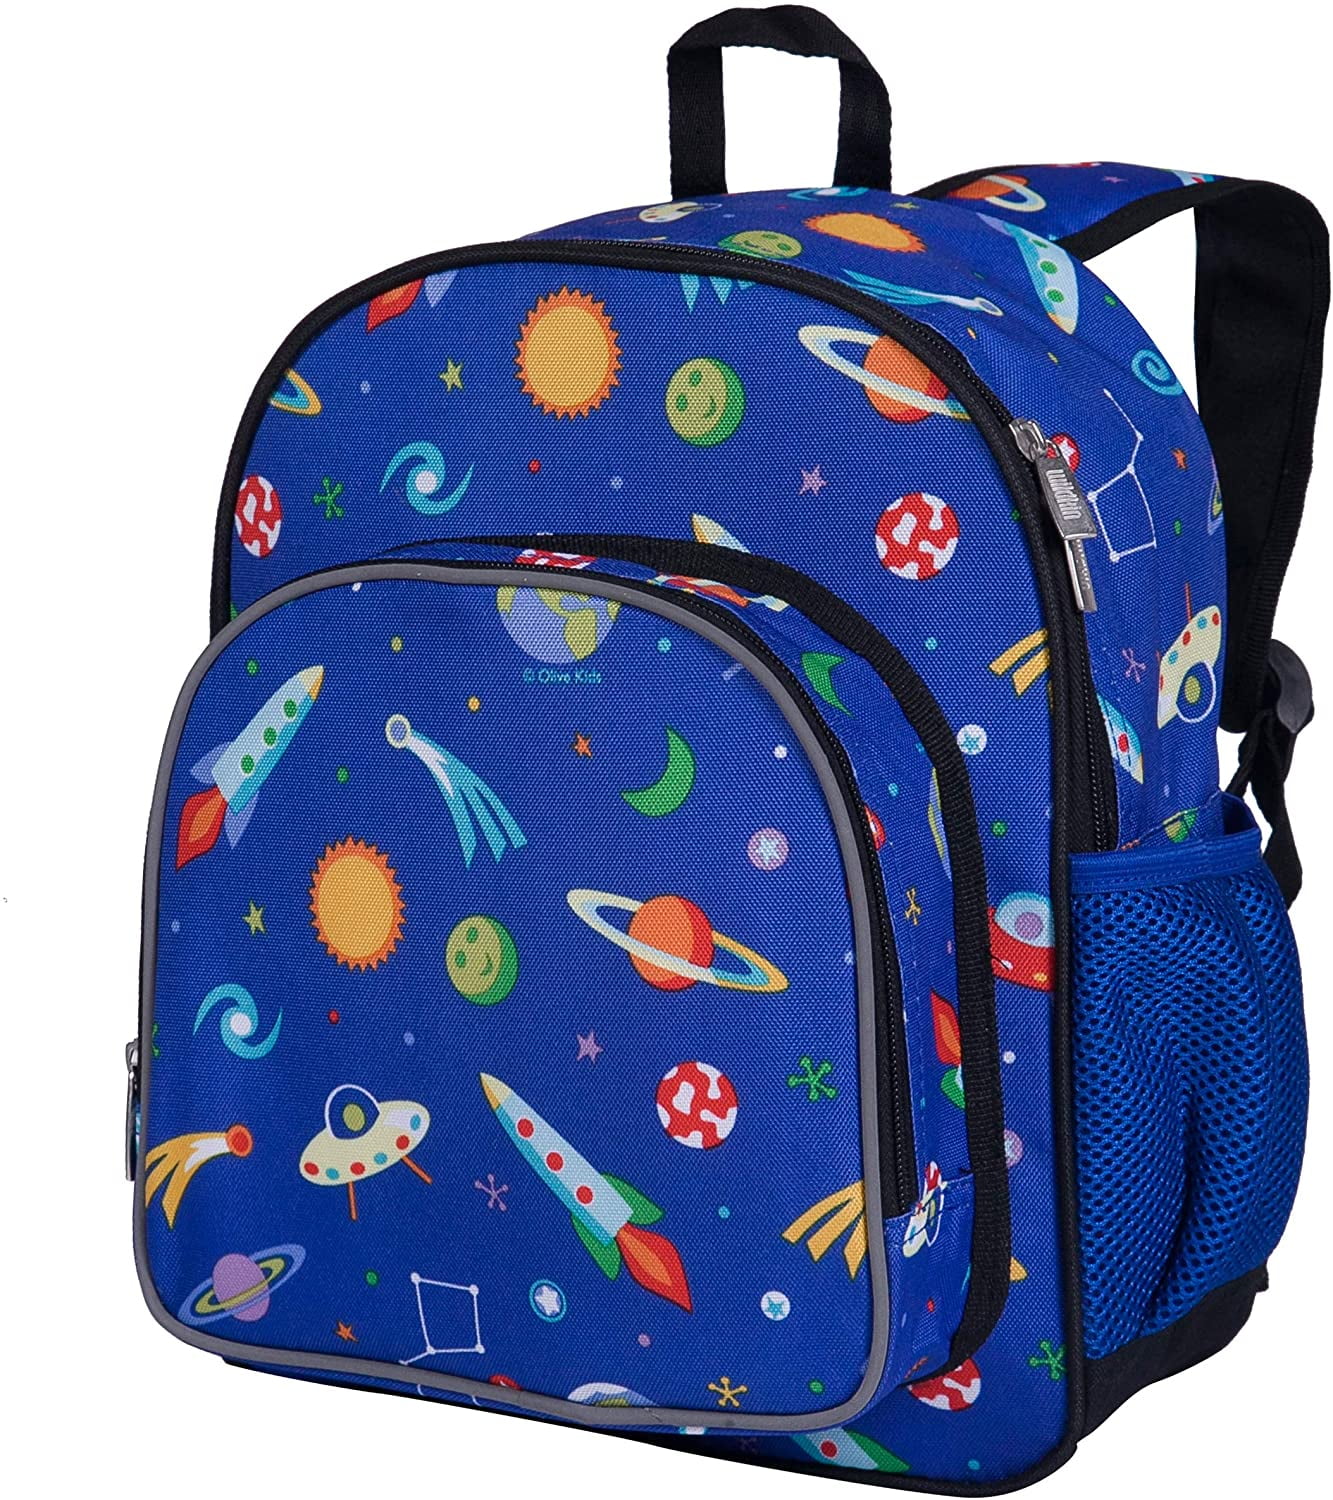 Wildkin Kids 12 Inch Backpack for Toddler Boys and Girls, Insulated ...